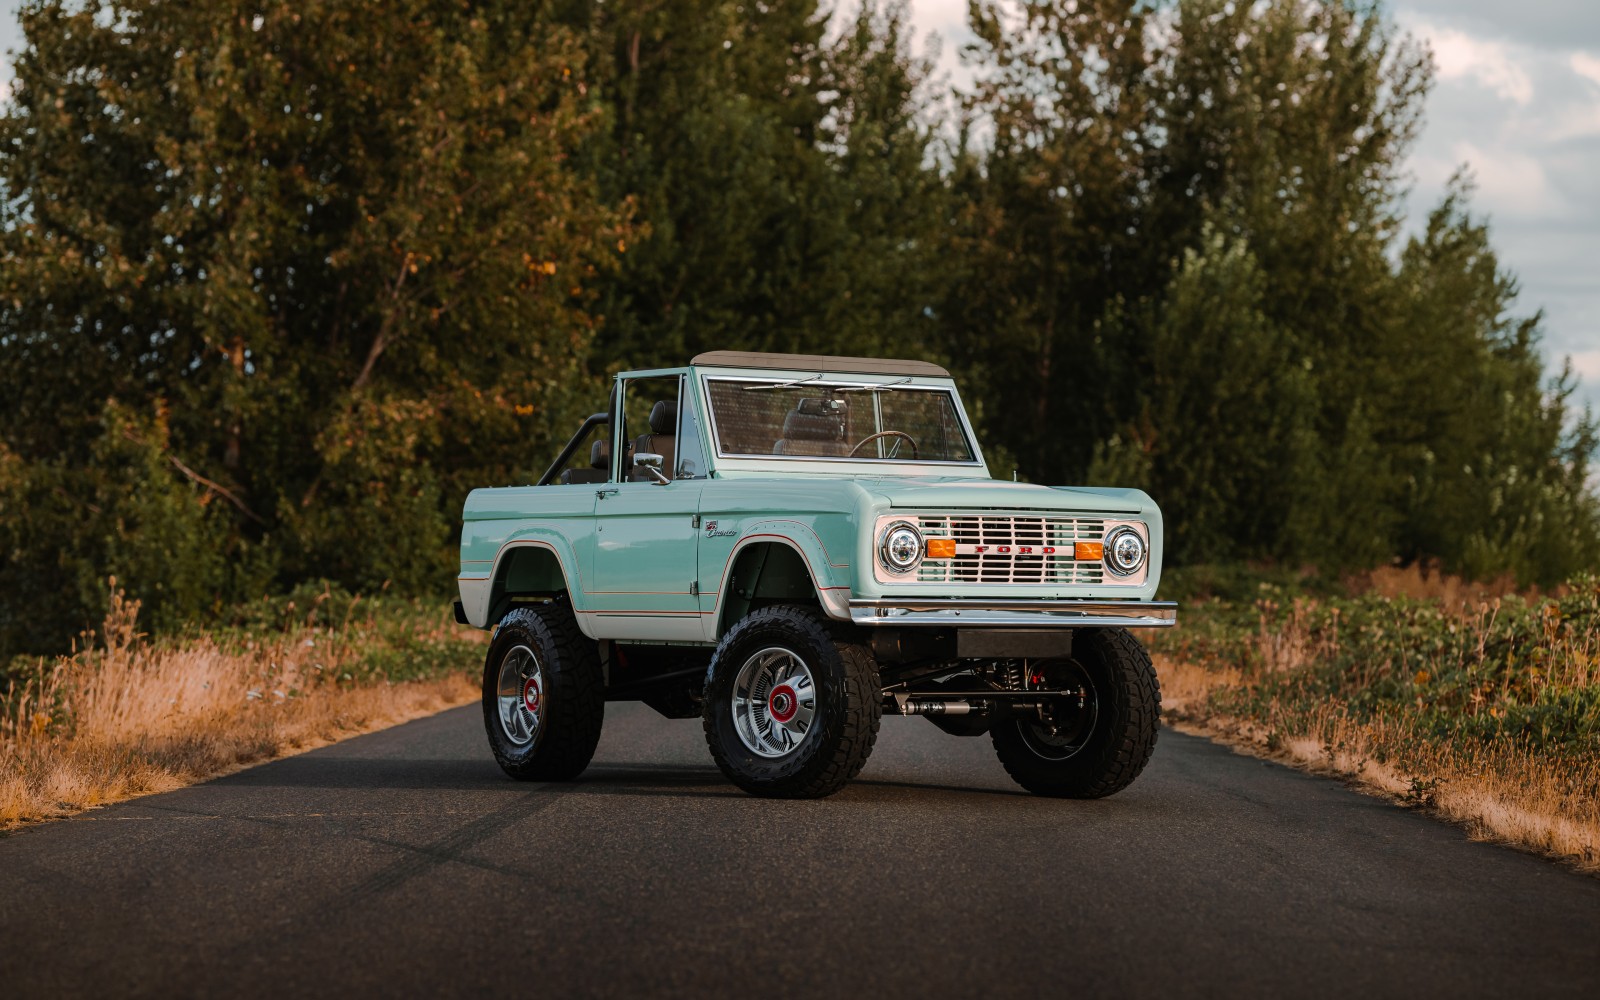 Desire a 1972 Ford Bronco changed into an EV? It will ticket you $380,000